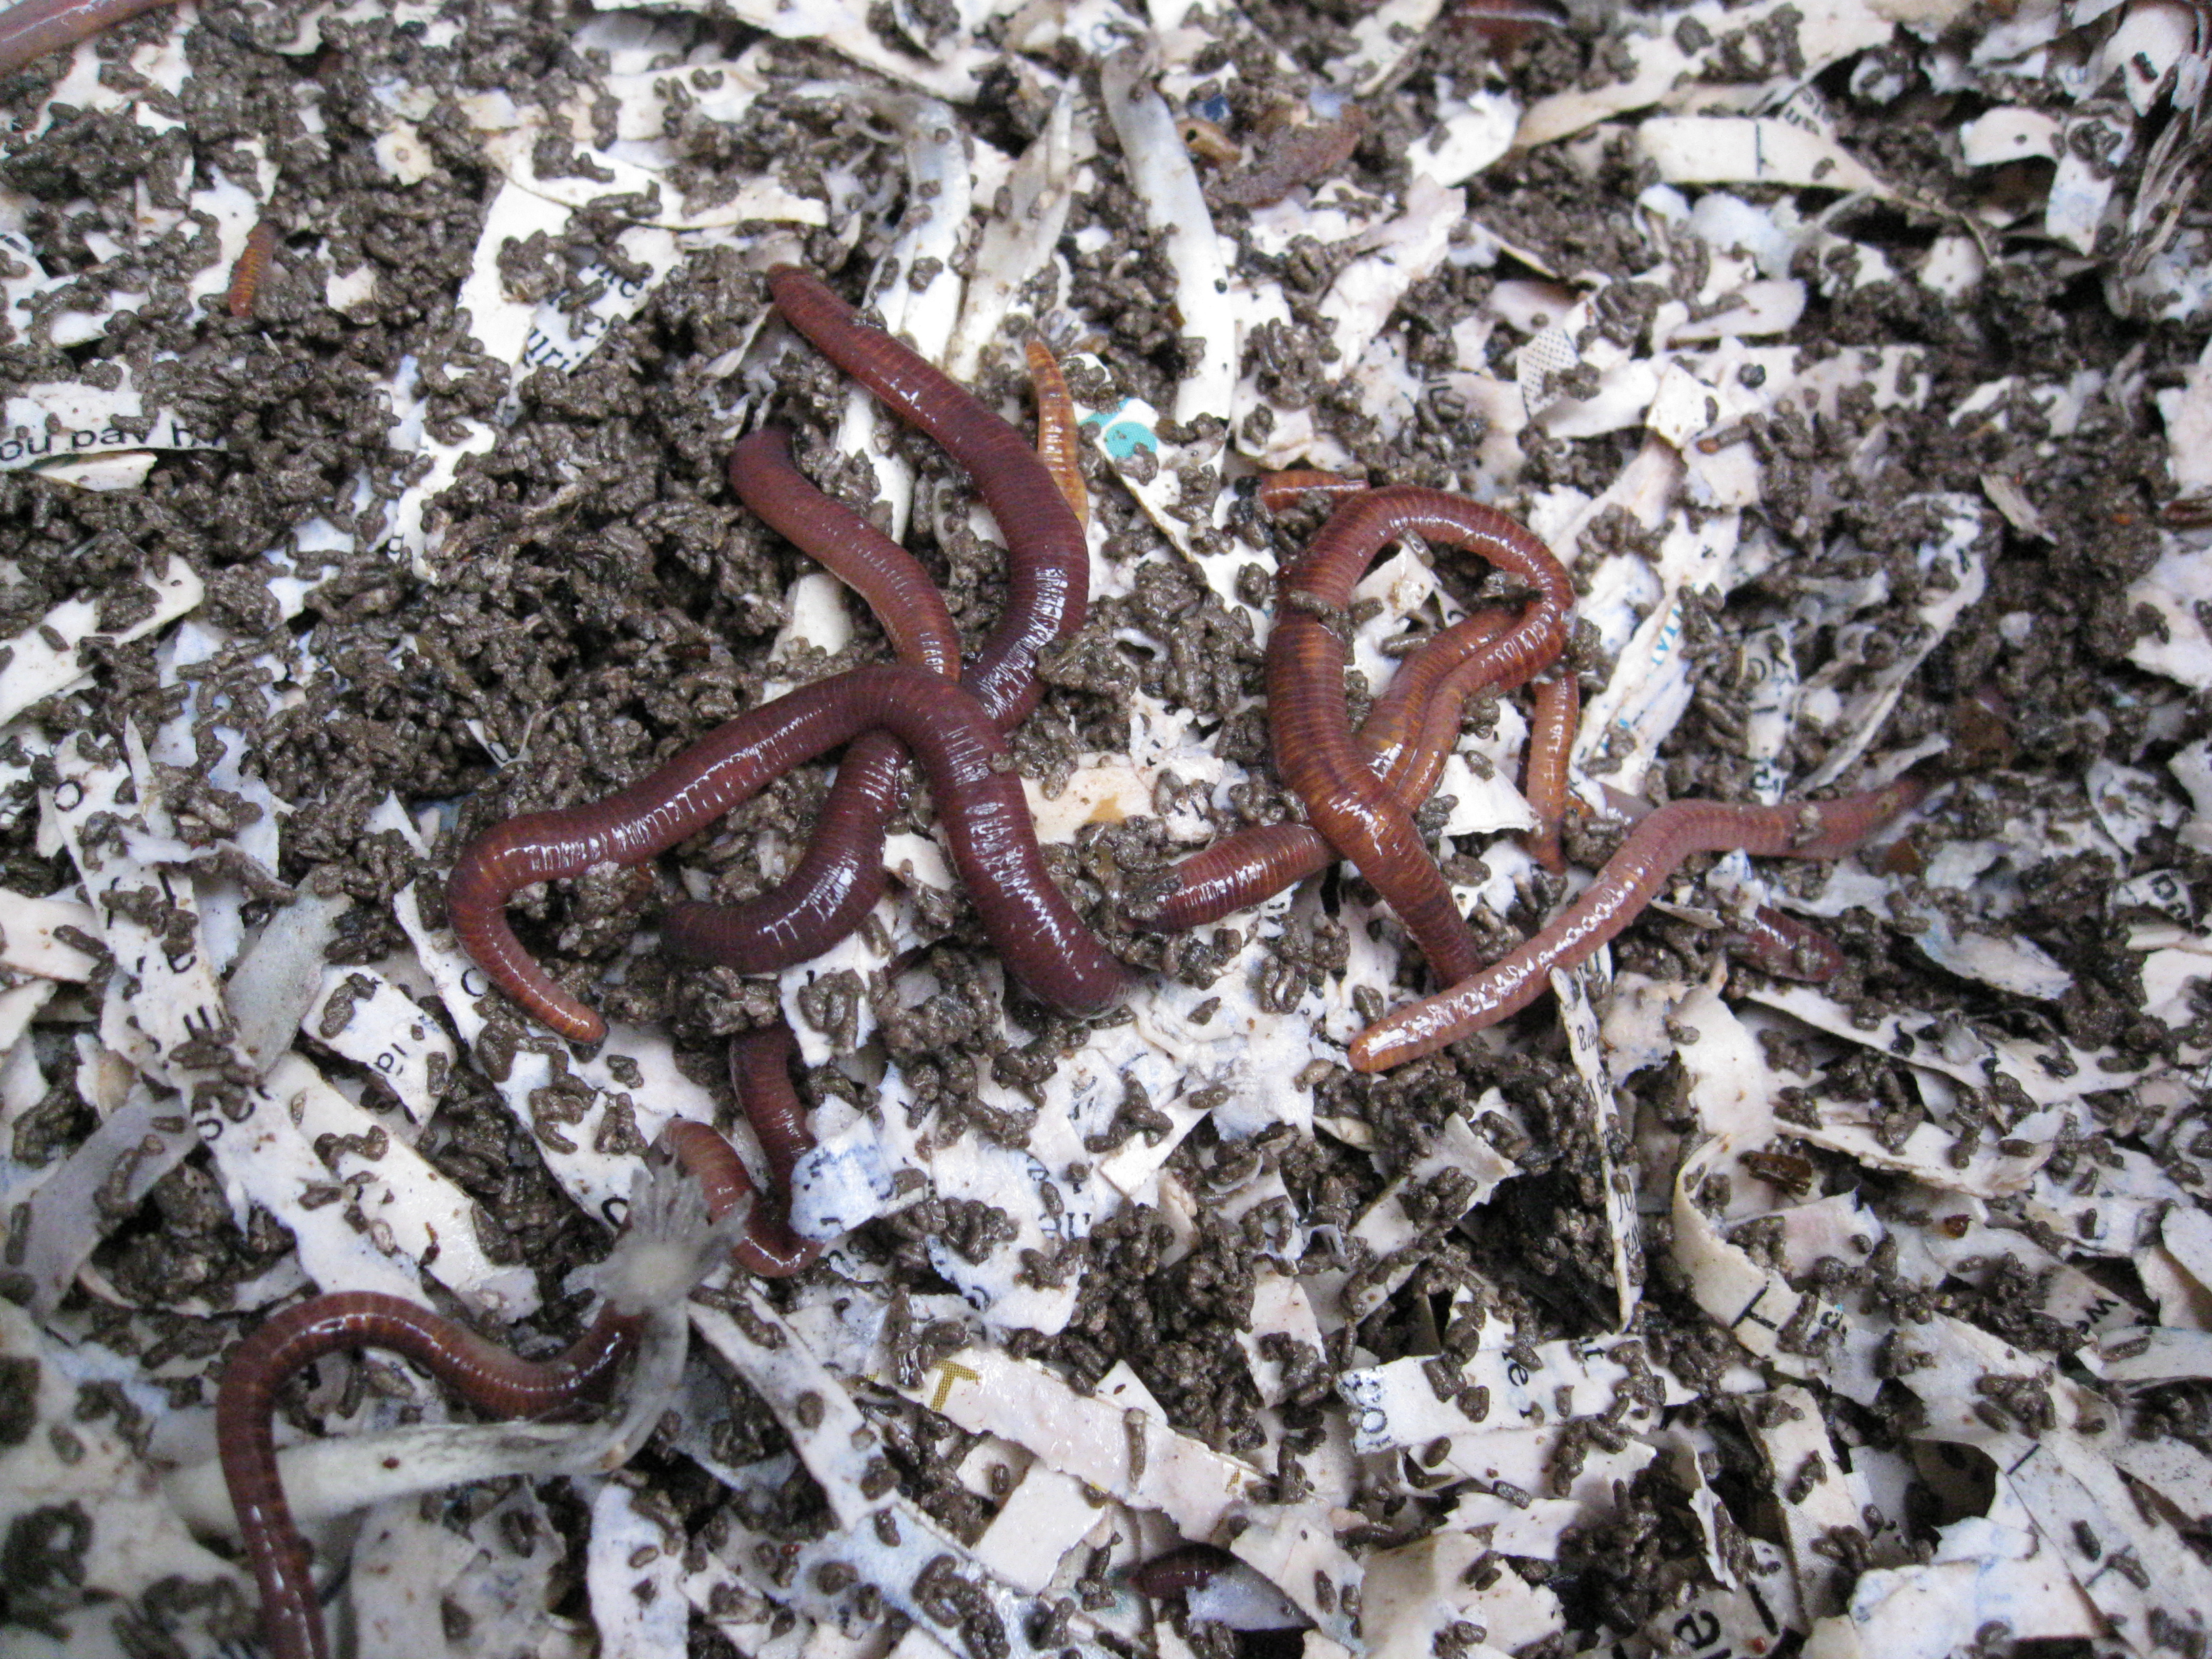 Red Wiggler worms in a worm bin. You can apply Diatomaceous earth to keep fruit flies away without harming worms. 